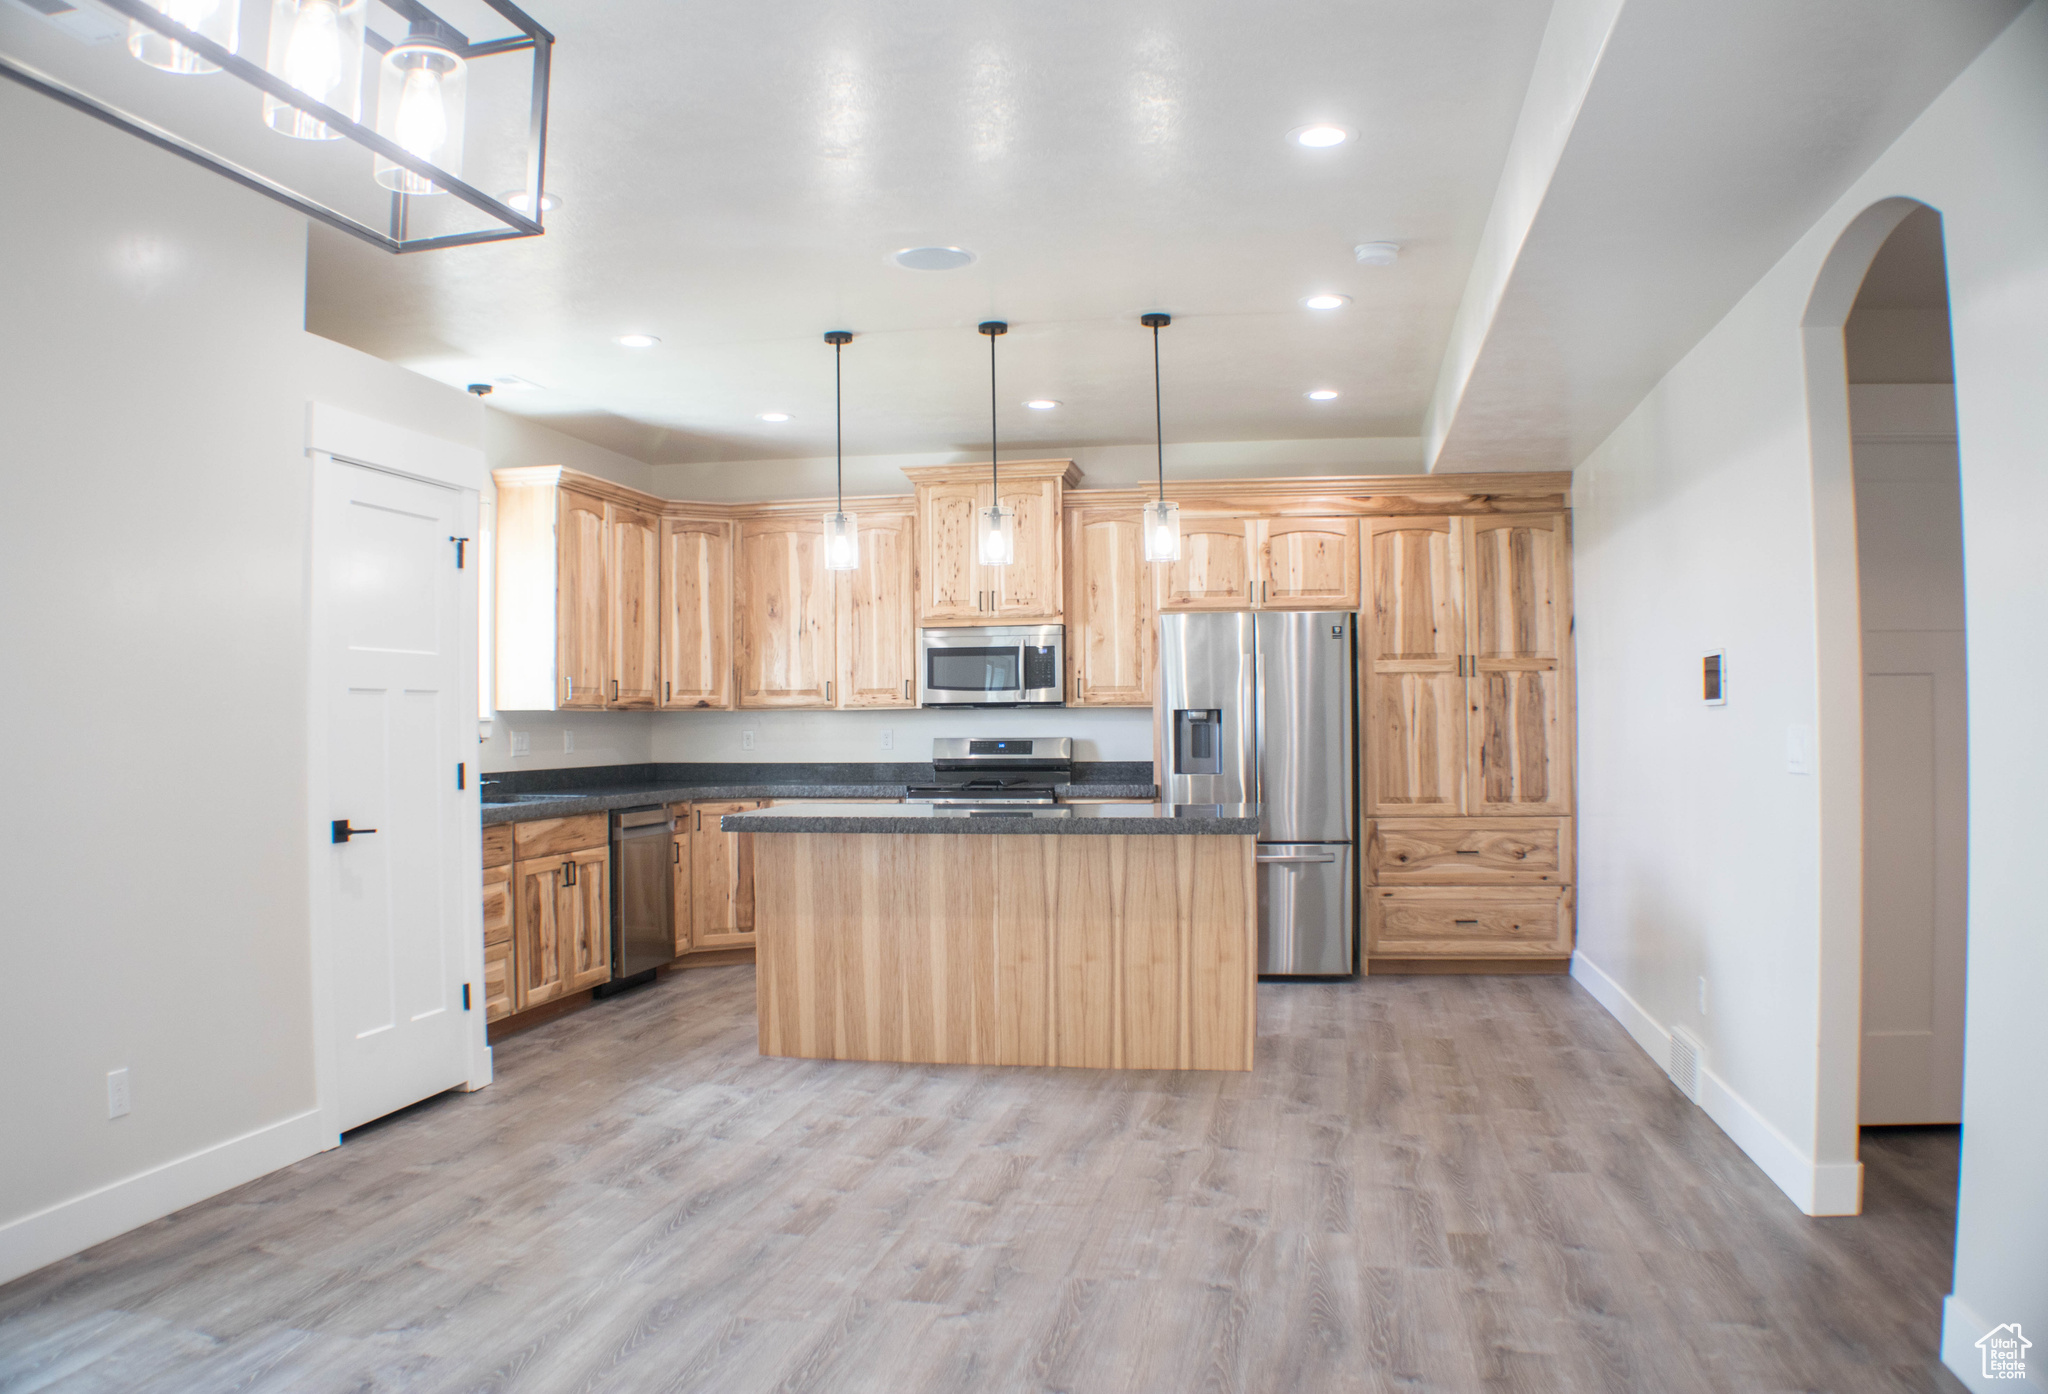 Kitchen with appliances with stainless steel finishes, a kitchen island, light hardwood / wood-style floors, and hanging light fixtures